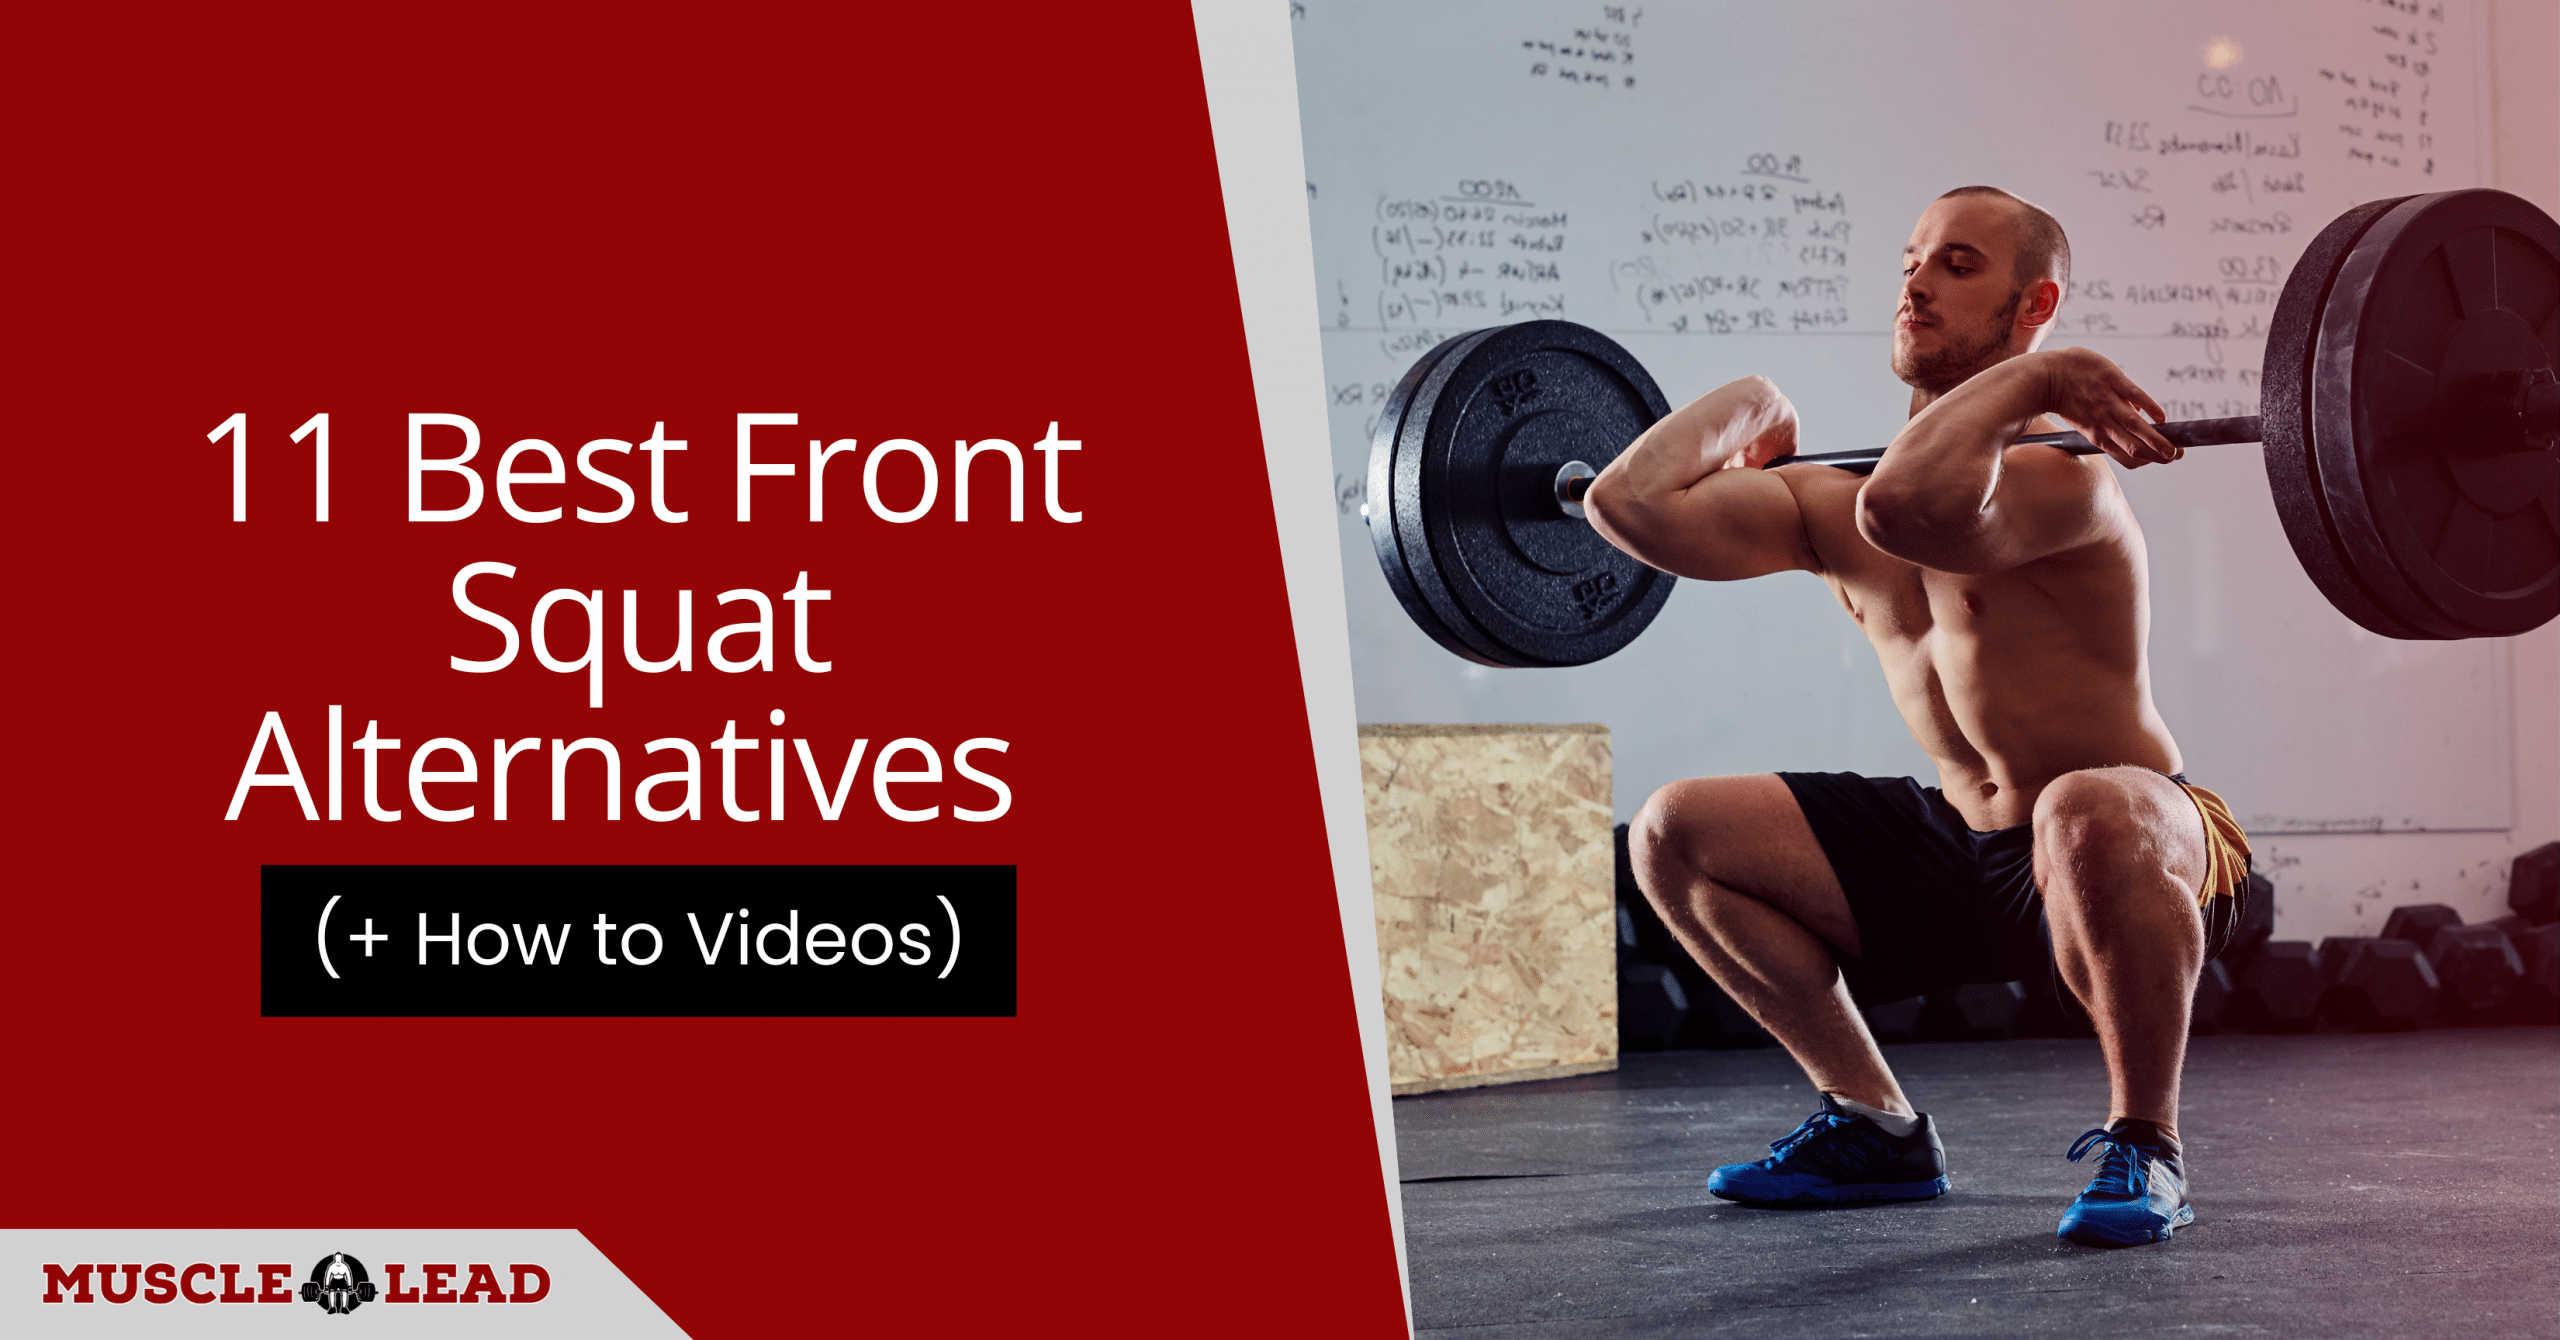 11 Best Front Squat Alternatives (+ How to Videos)